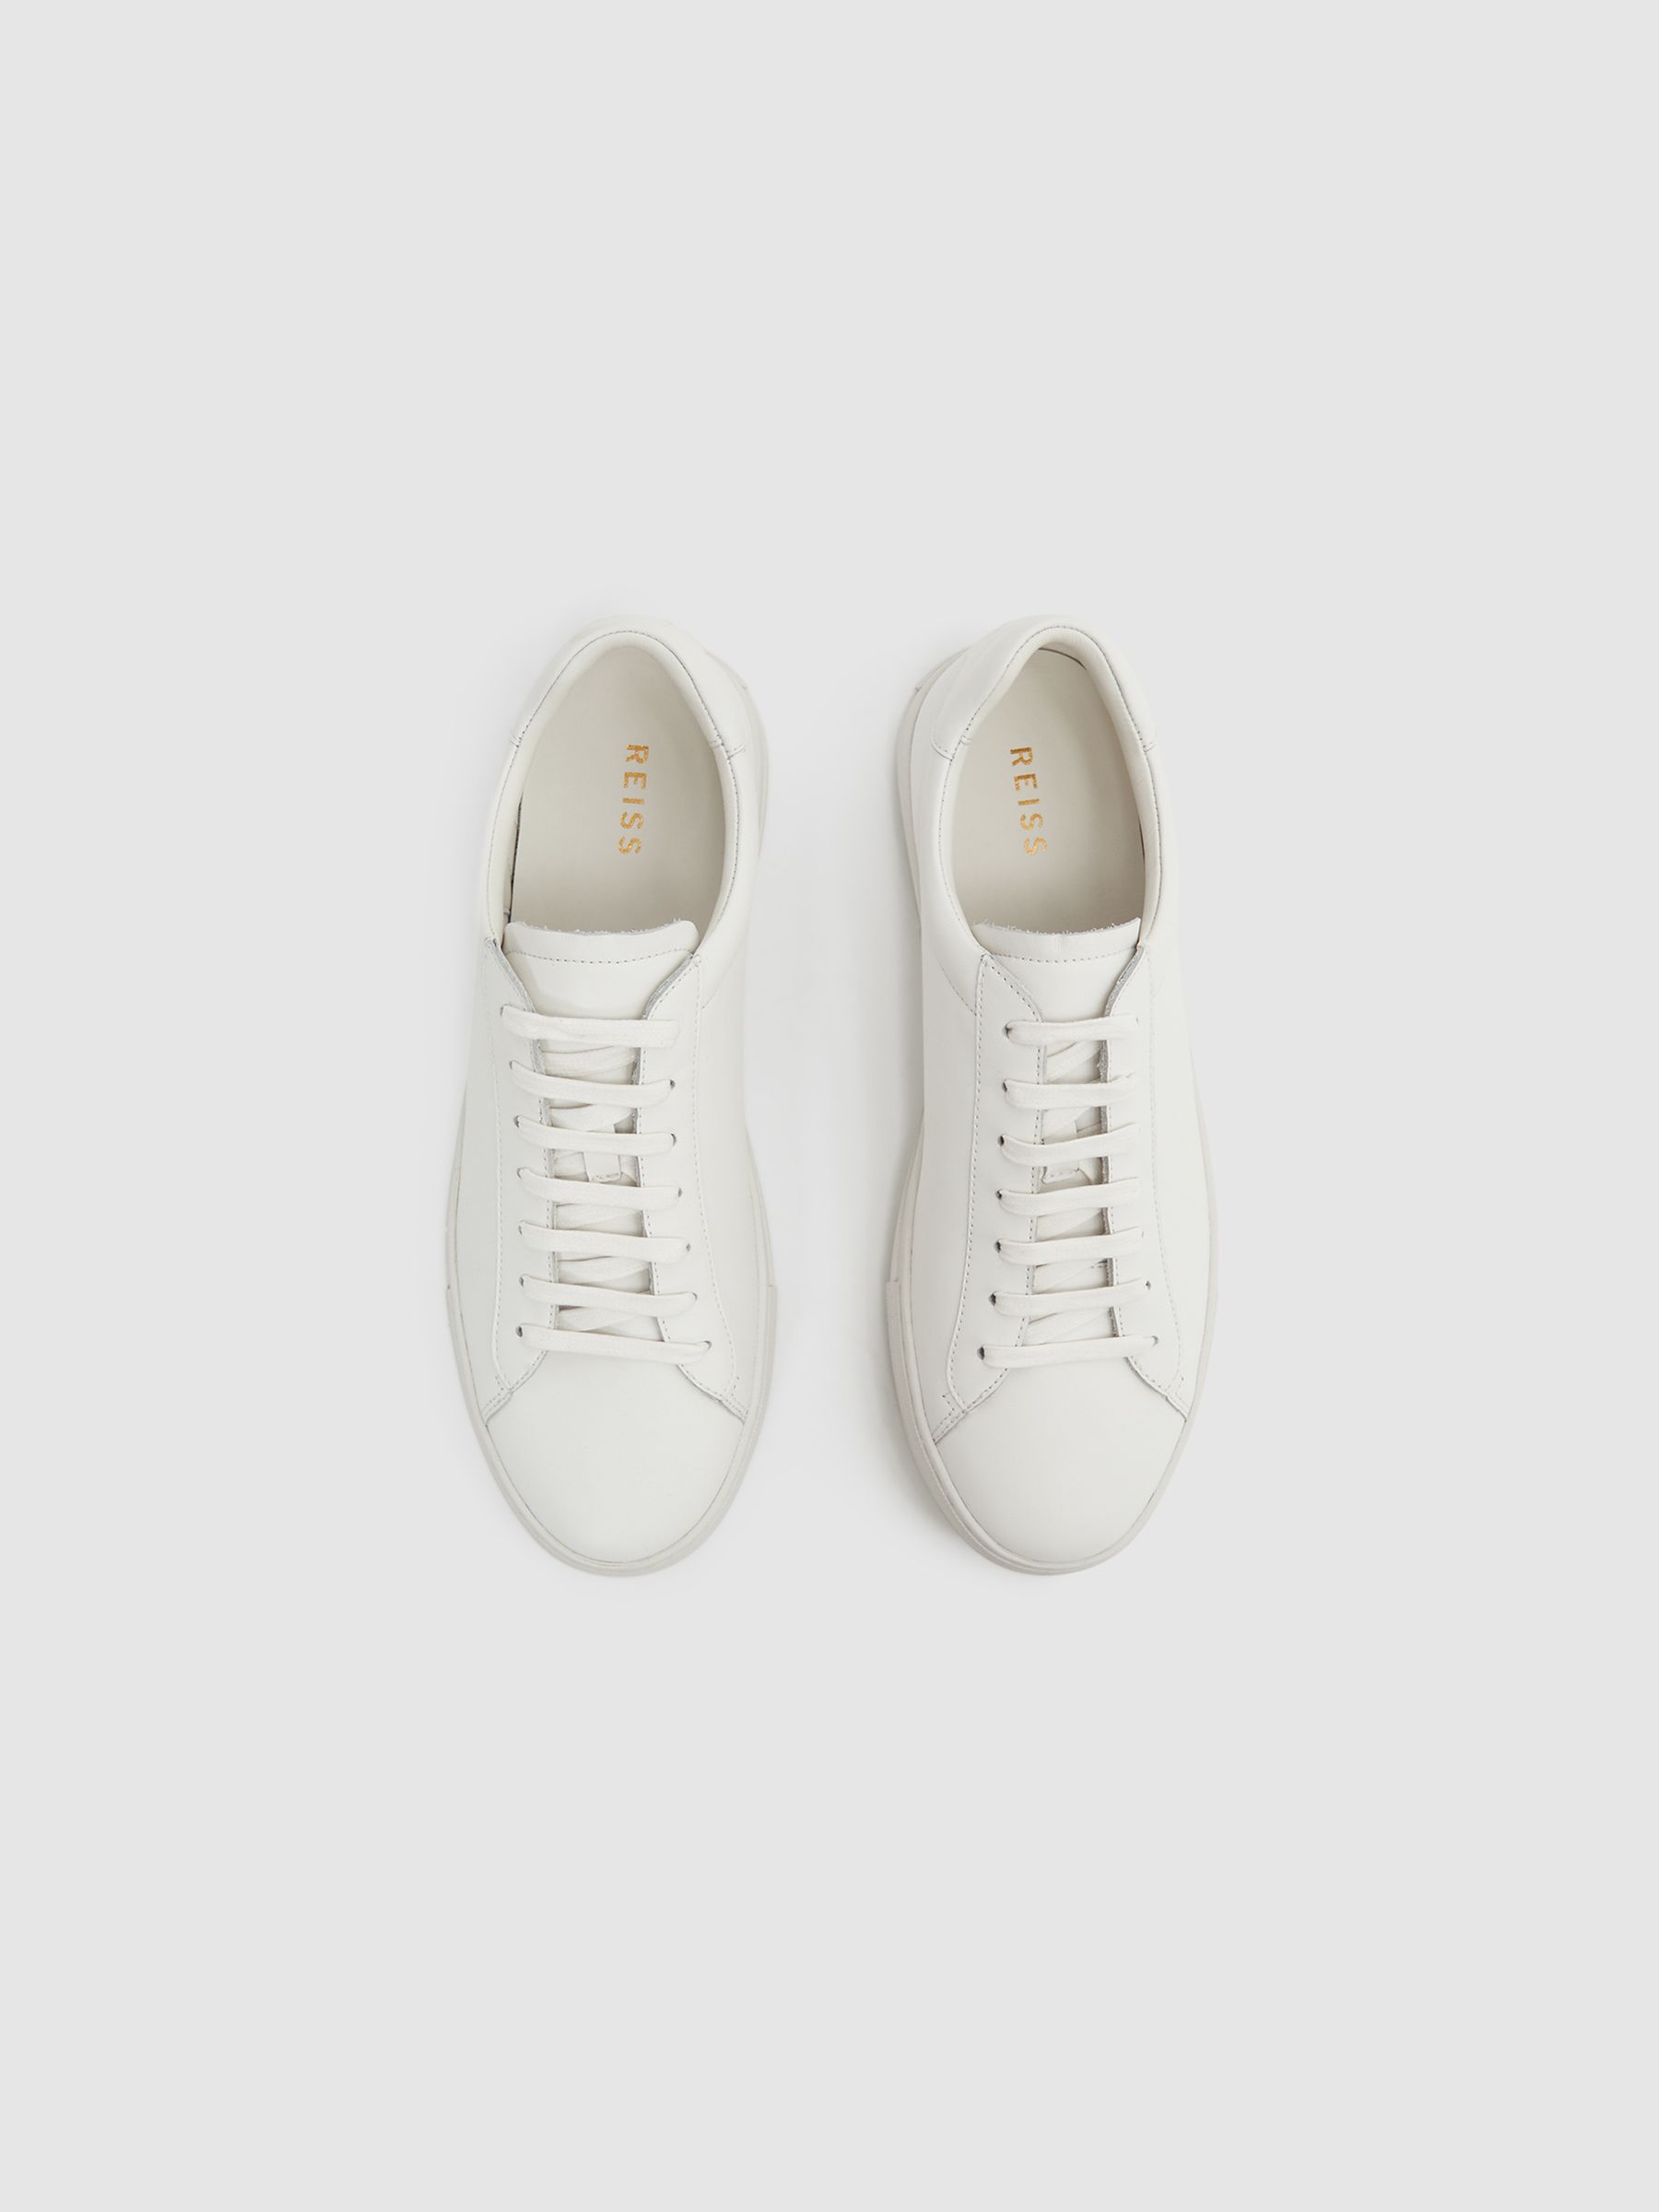 Reiss Finley Leather Trainers - REISS